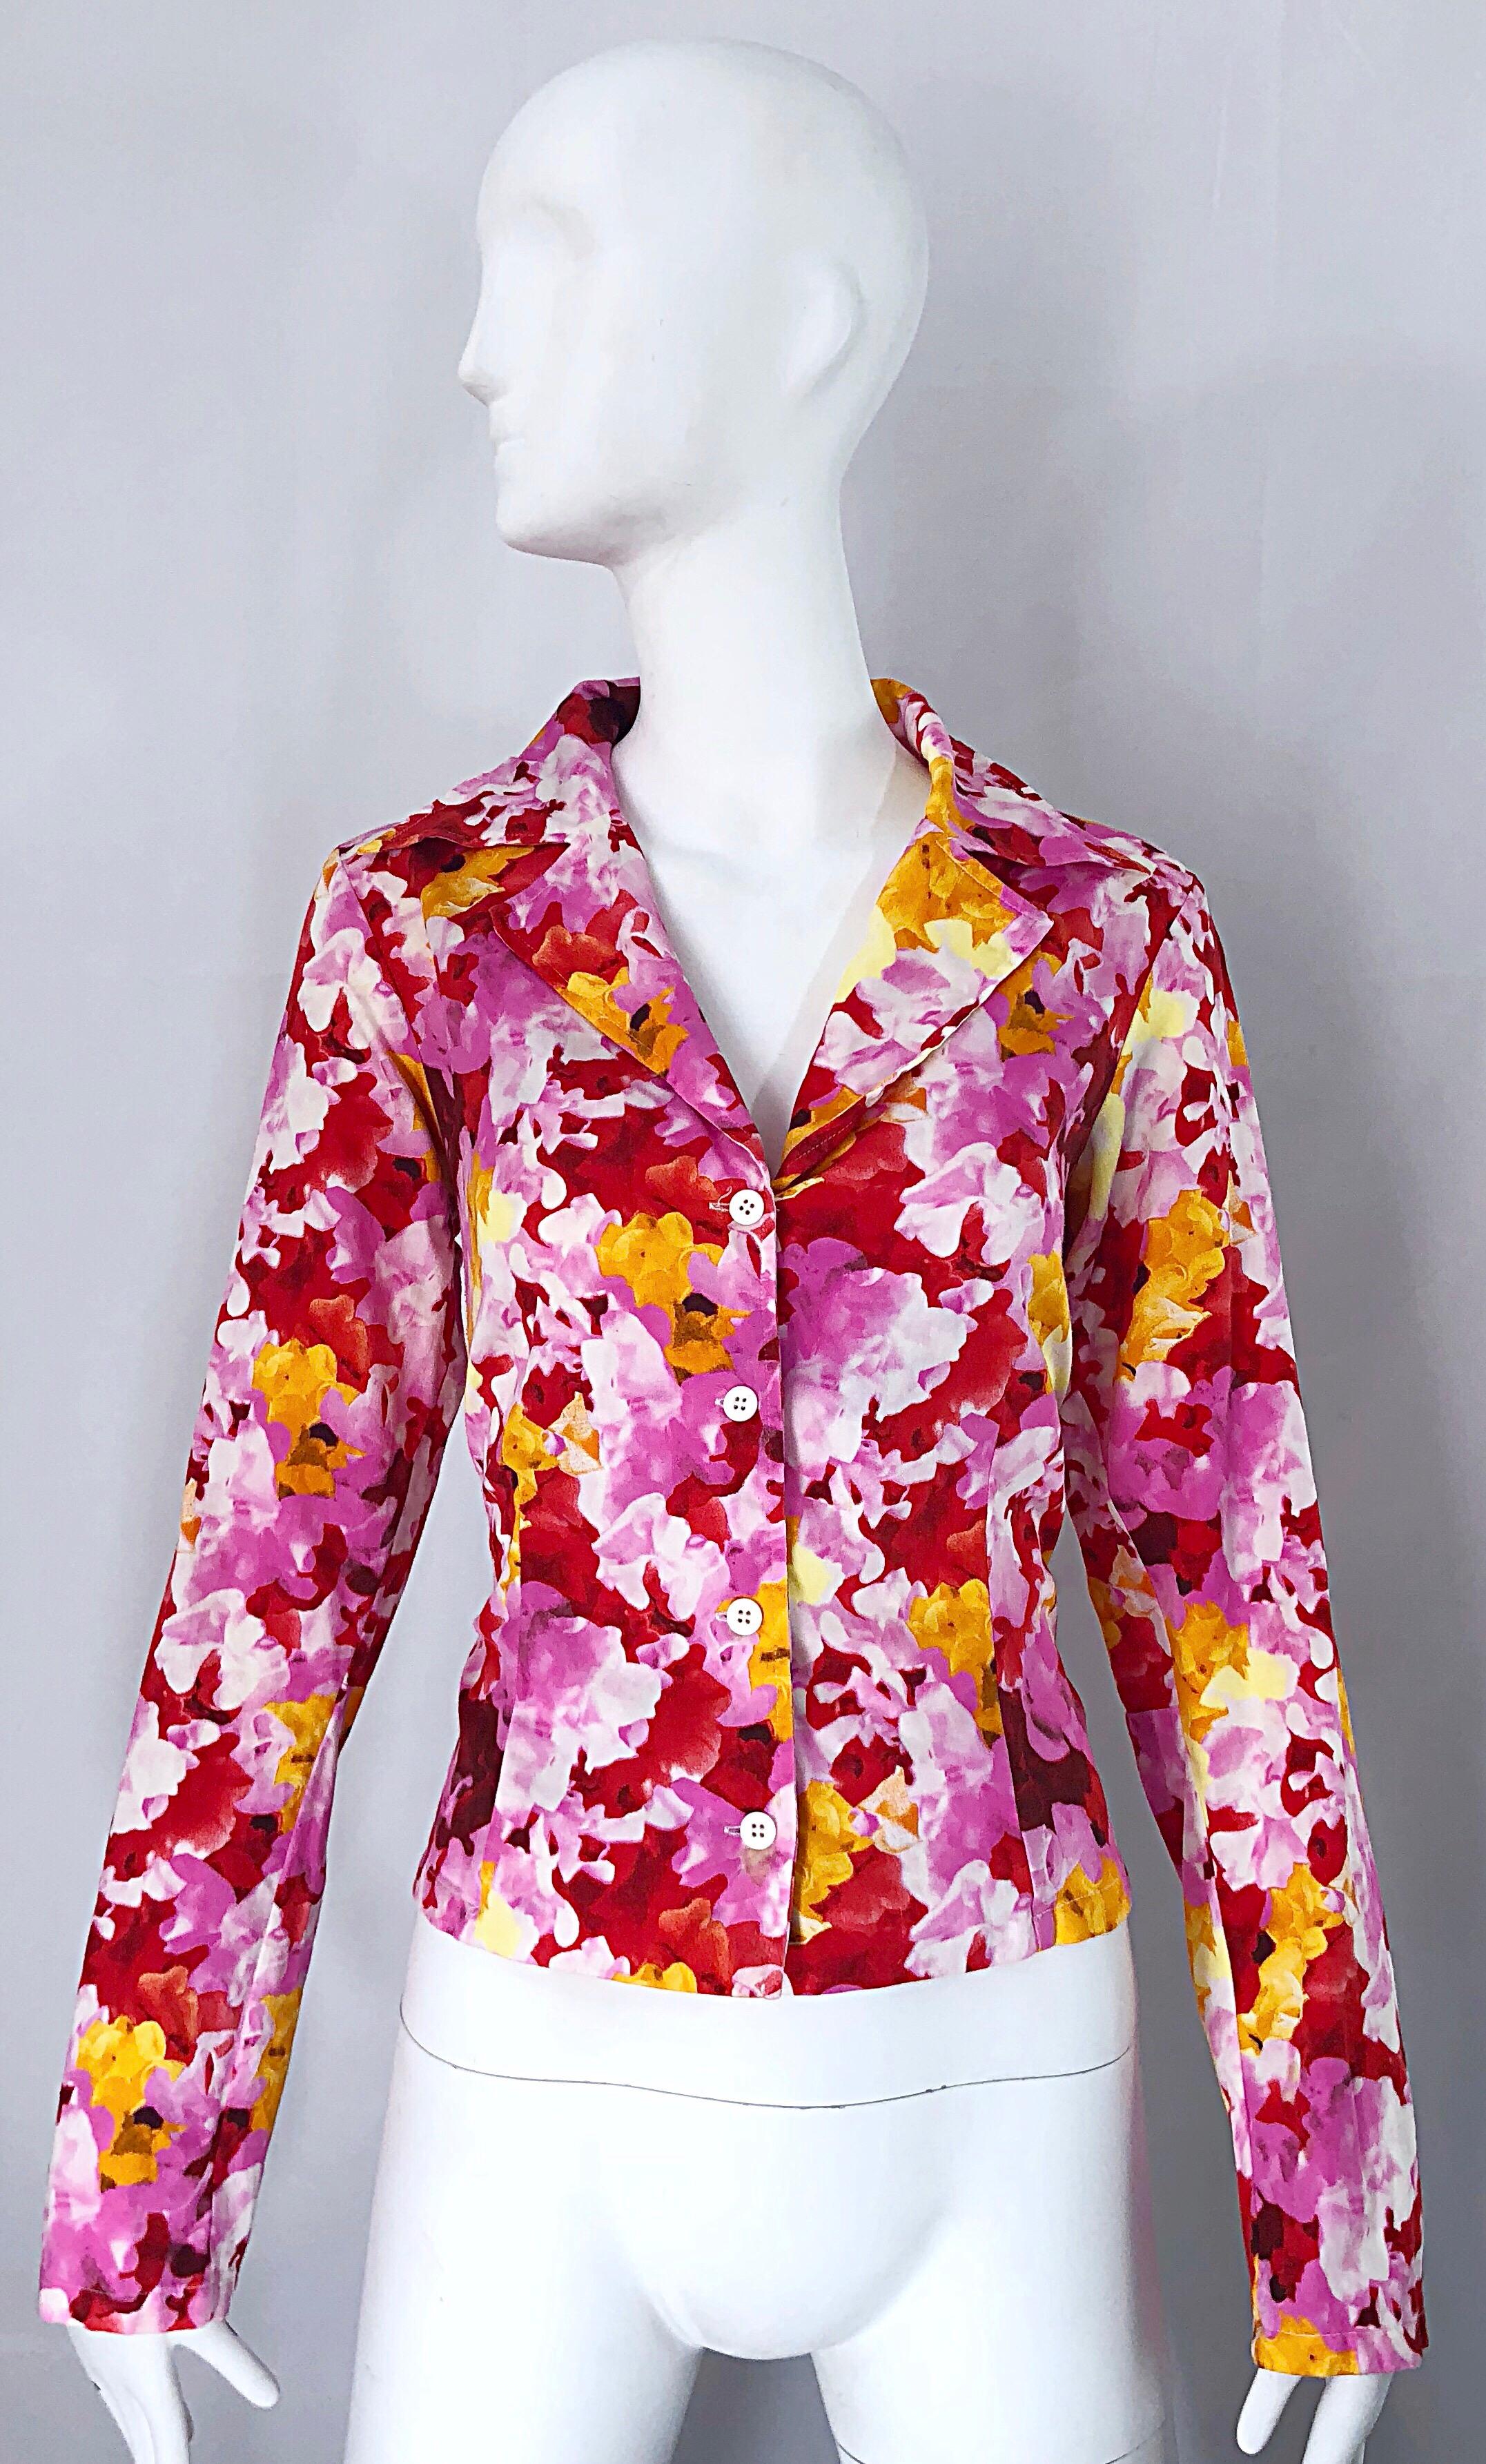 Chic vintage early 90s AGNES B pink, orange, red and white lightweight cotton cropped shirt jacket! Features vibrant abstract prints with 70s style lapels. Buttons up the front. Great tailored fit that is perfect alone or layered. In great